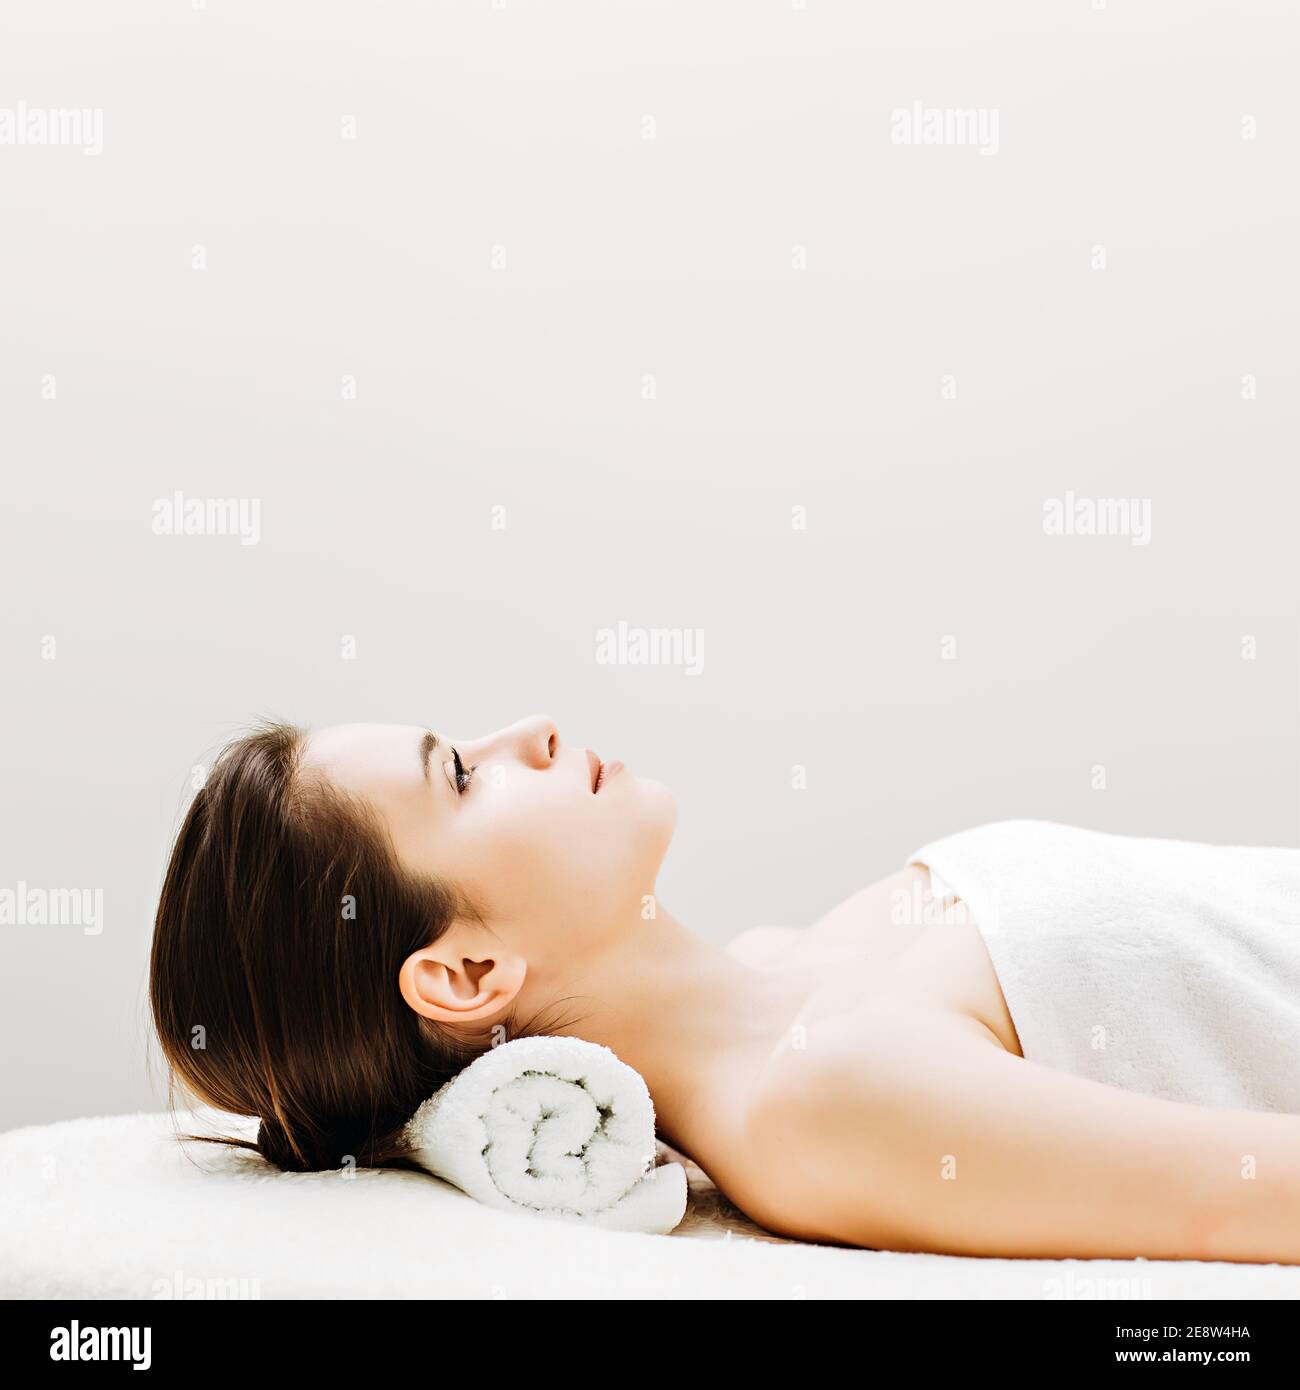 Young woman getting ready for spa or medical treatments Stock Photo